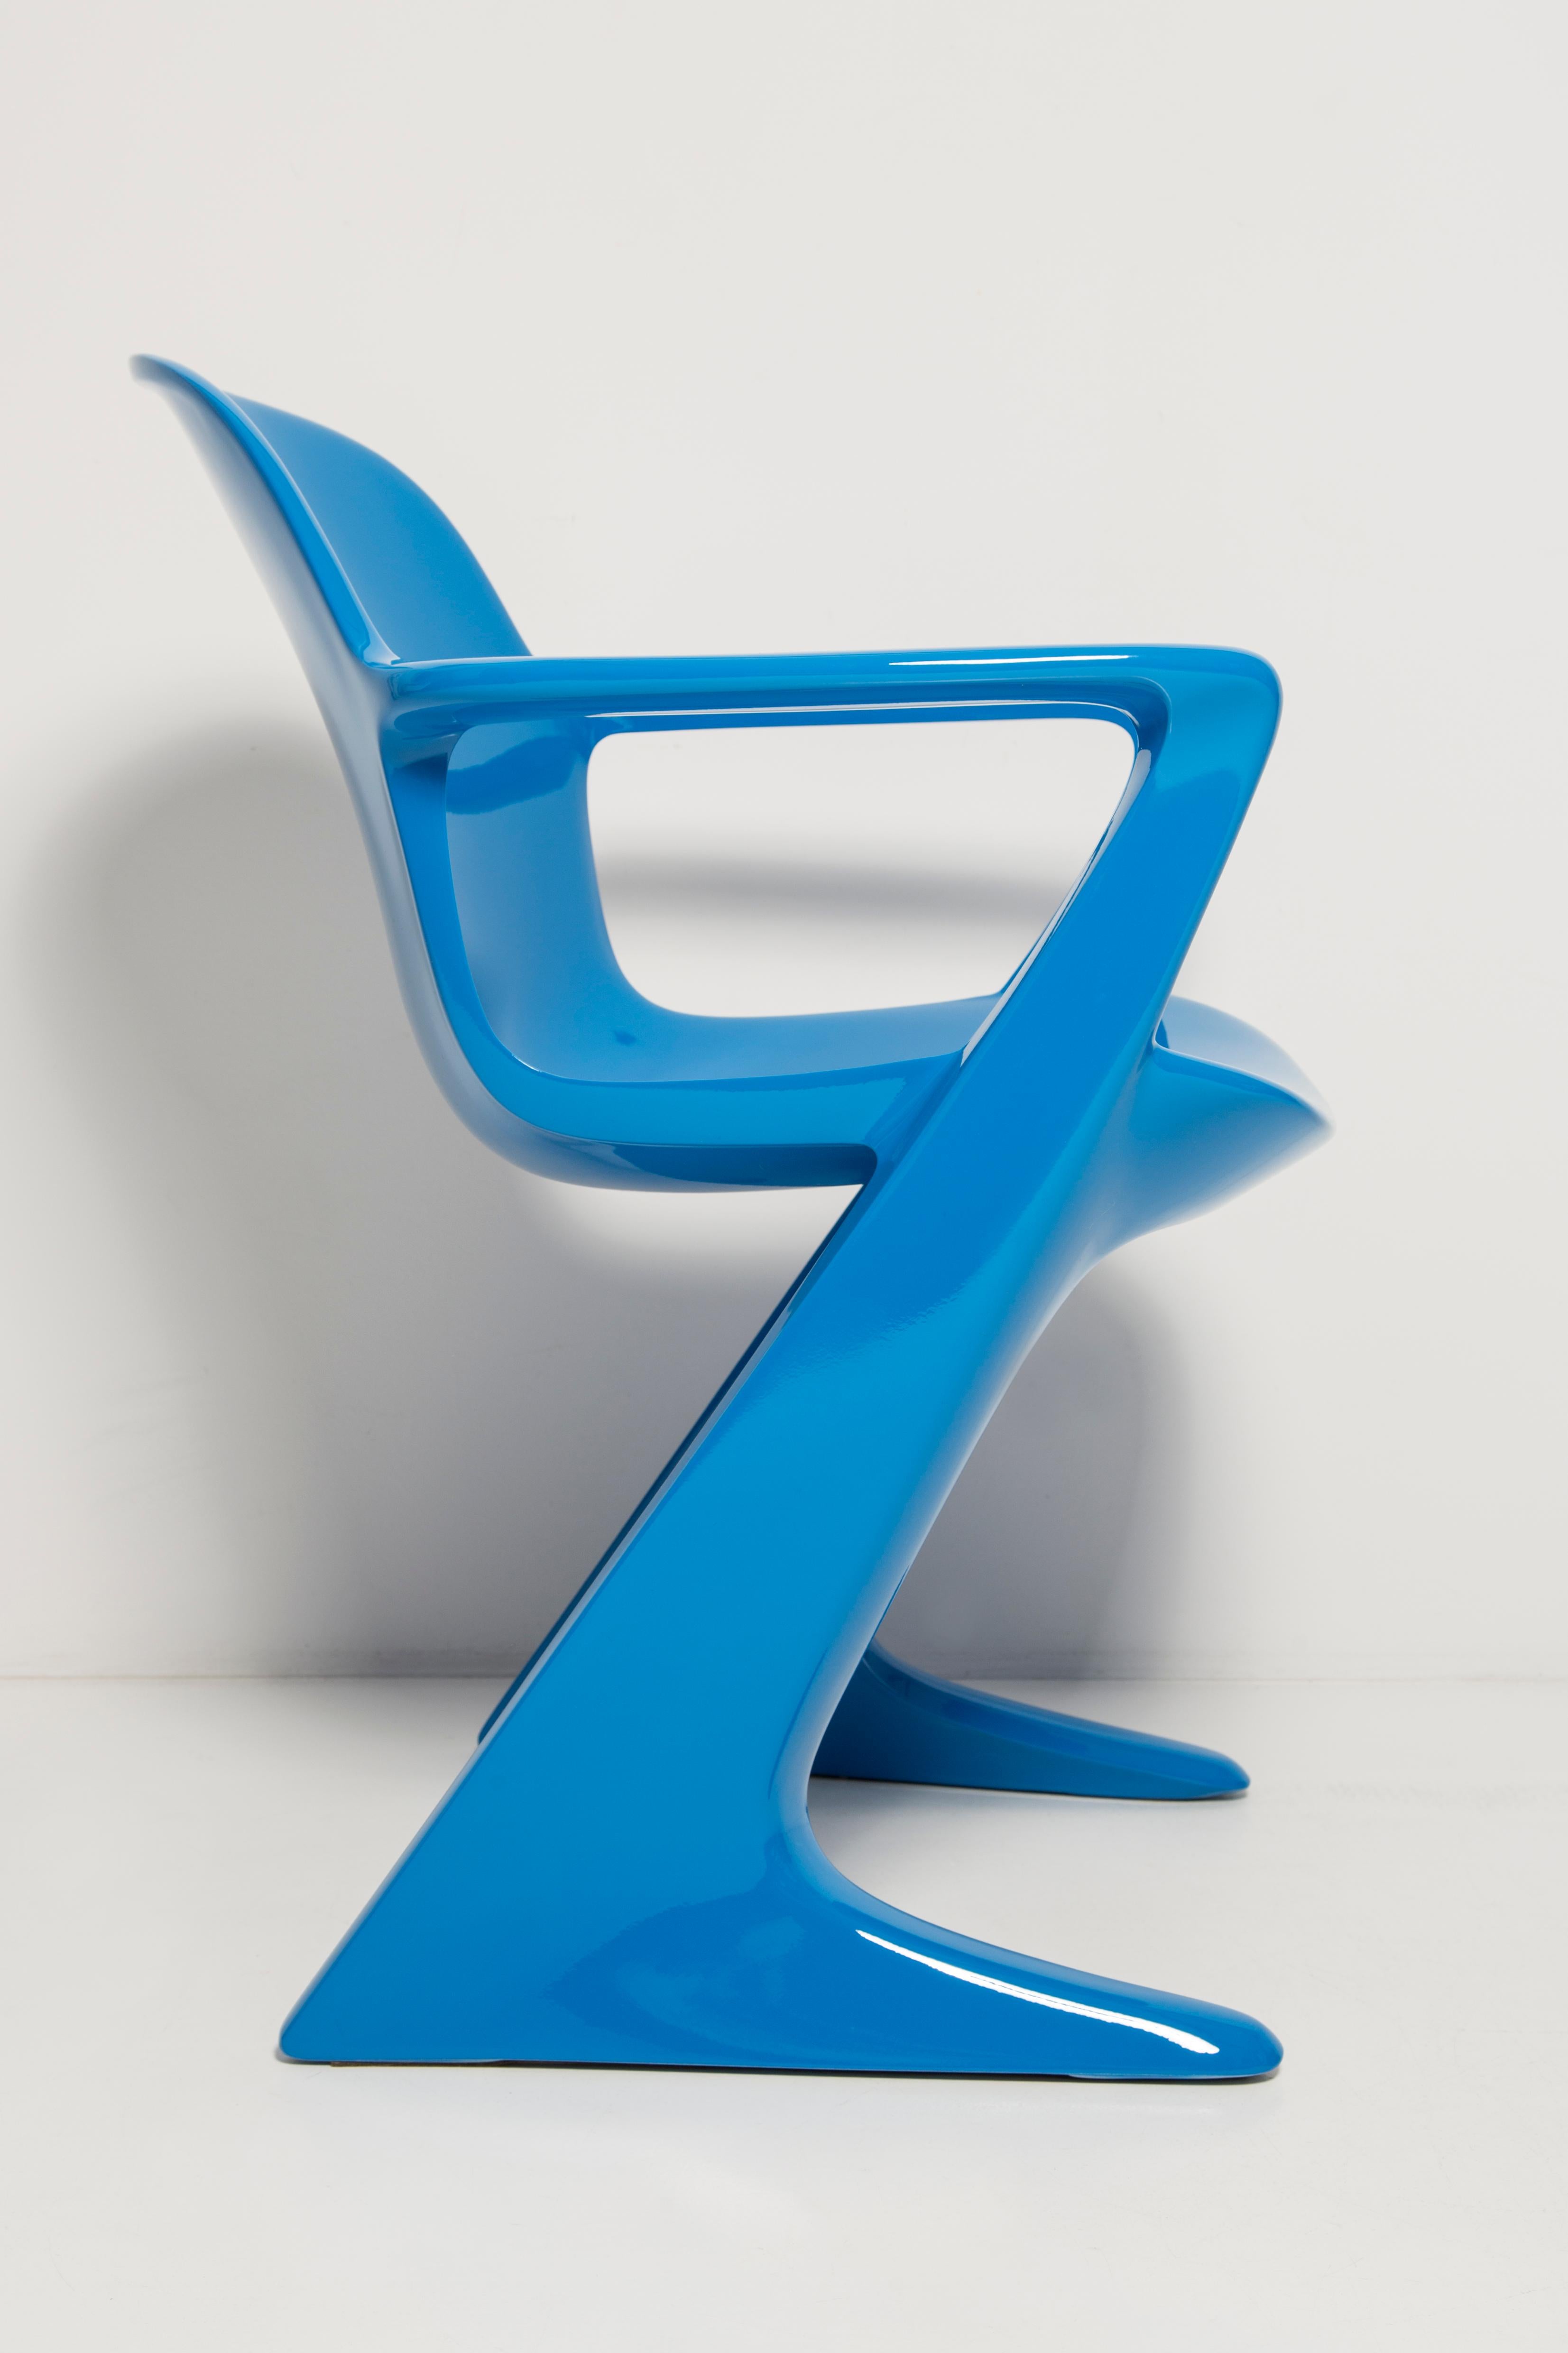 Lacquered Blue Kangaroo Chair Designed by Ernst Moeckl, Germany, 1968 For Sale